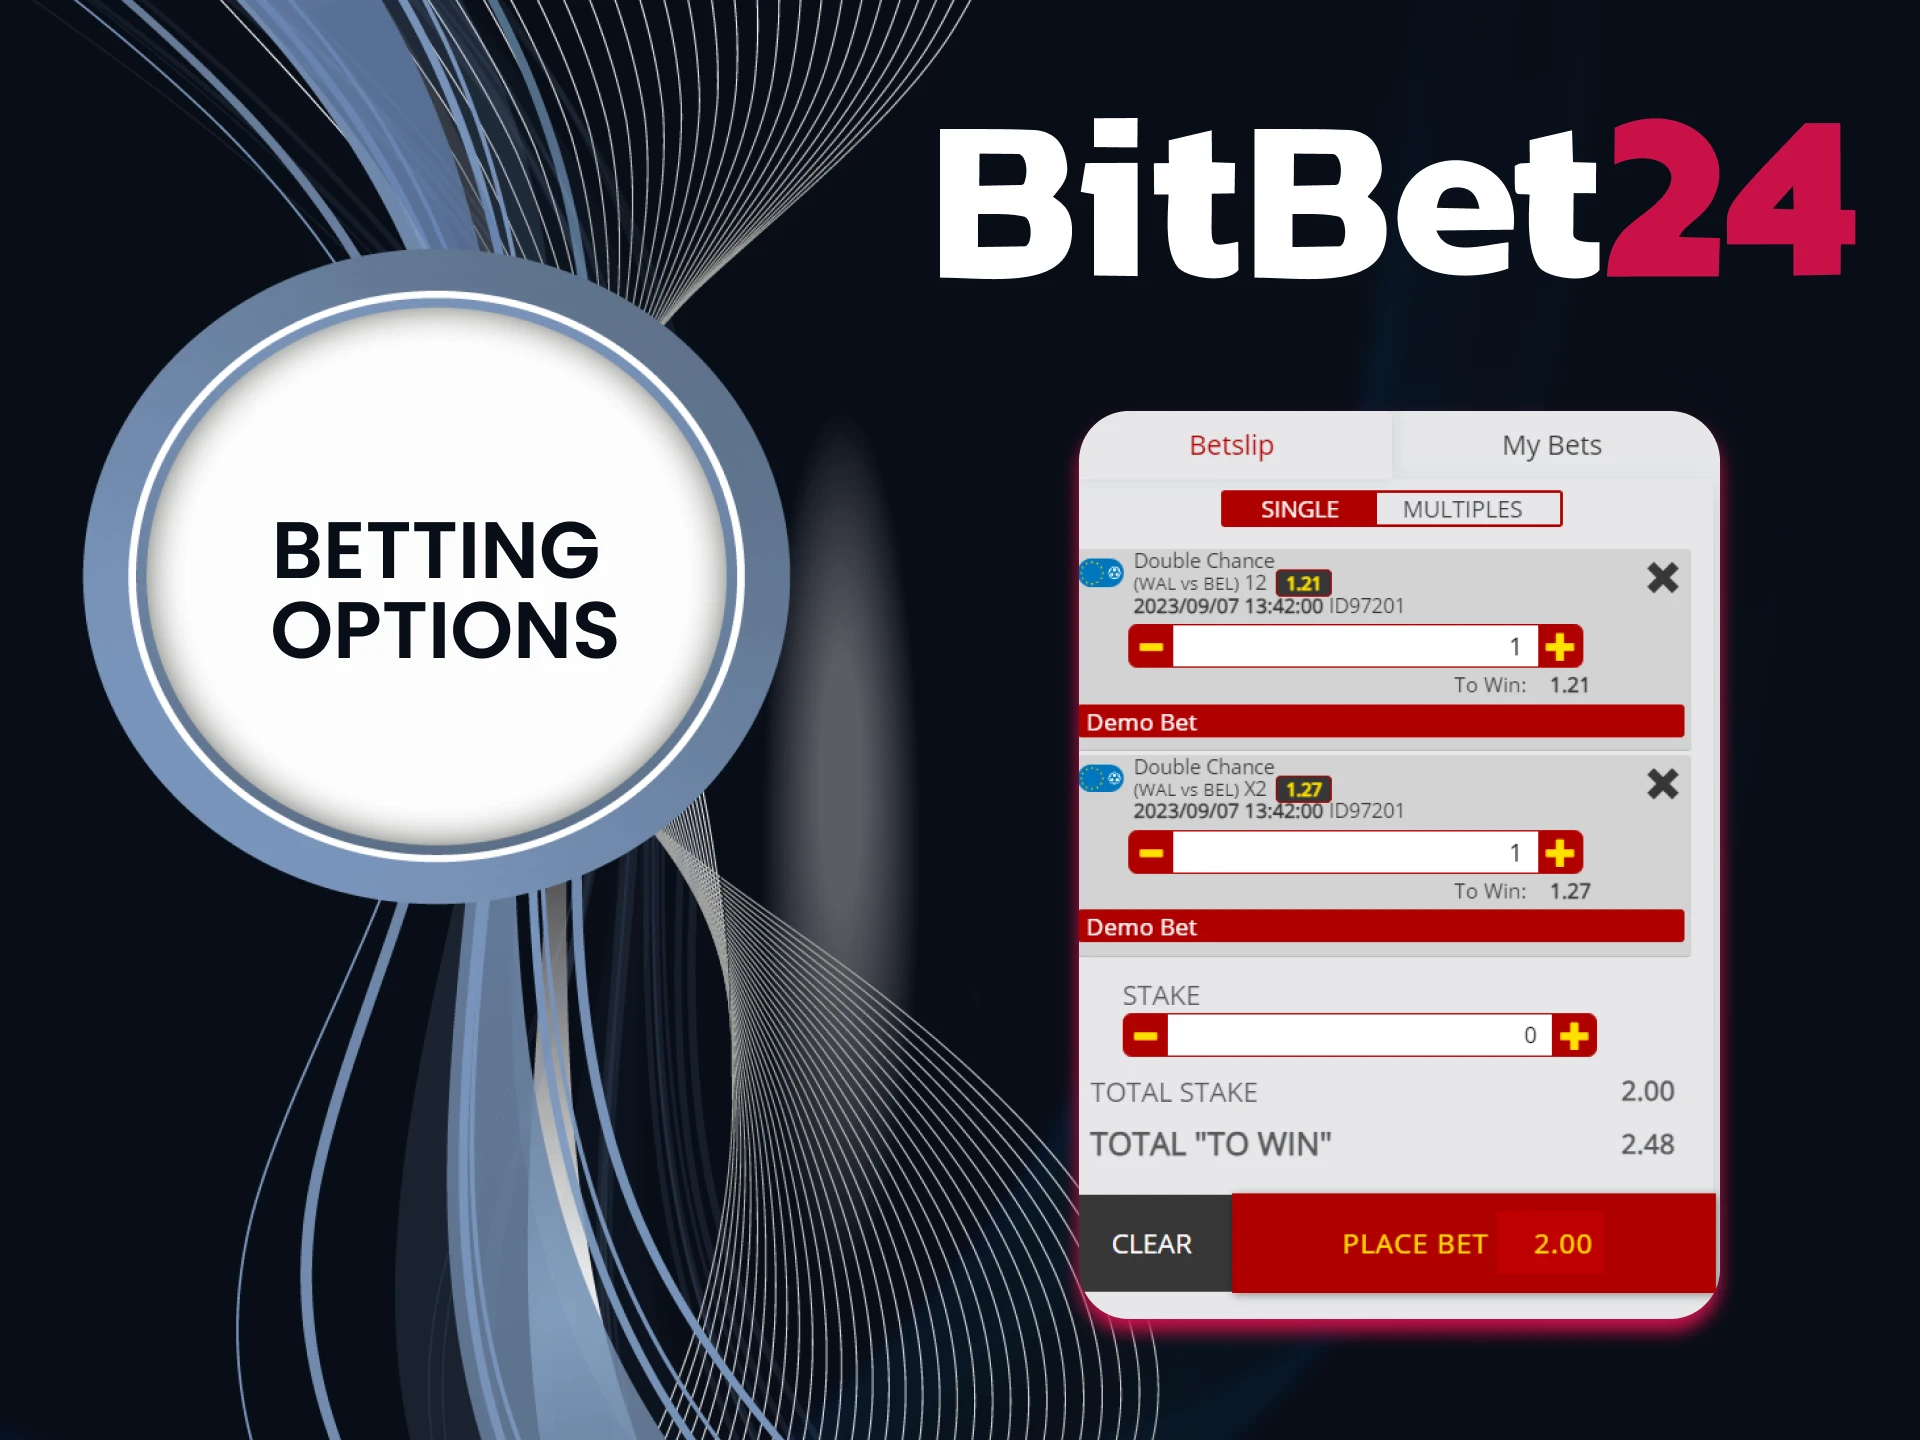 With BitBet24 try the best betting options.